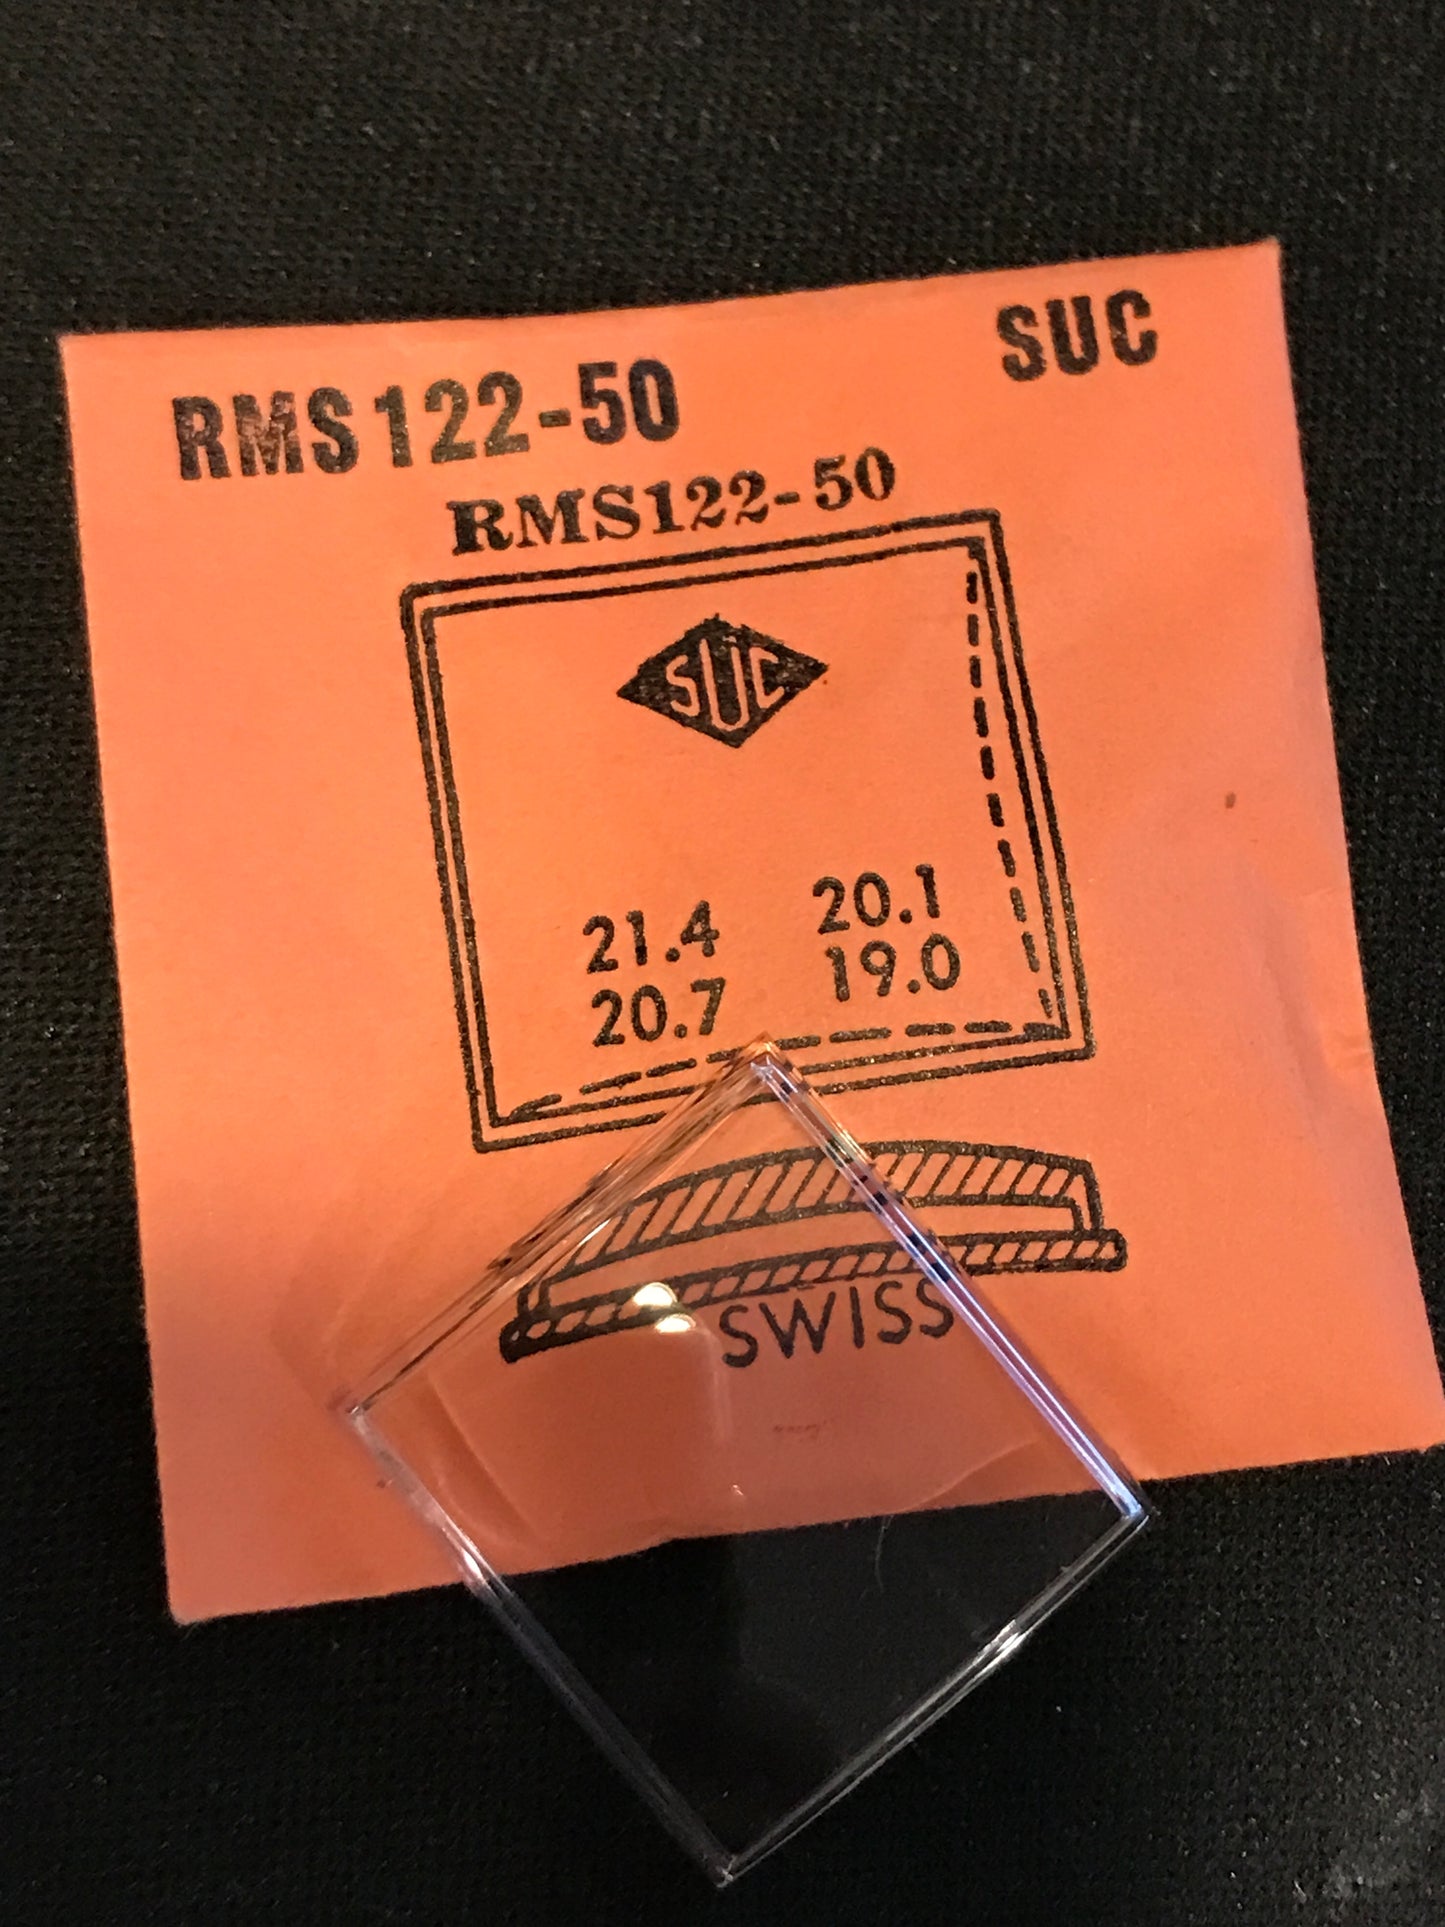 SUC Rocket Crystal RMS 122-50 for SWISS wrist watch - 20.7 x 19.0mm - New